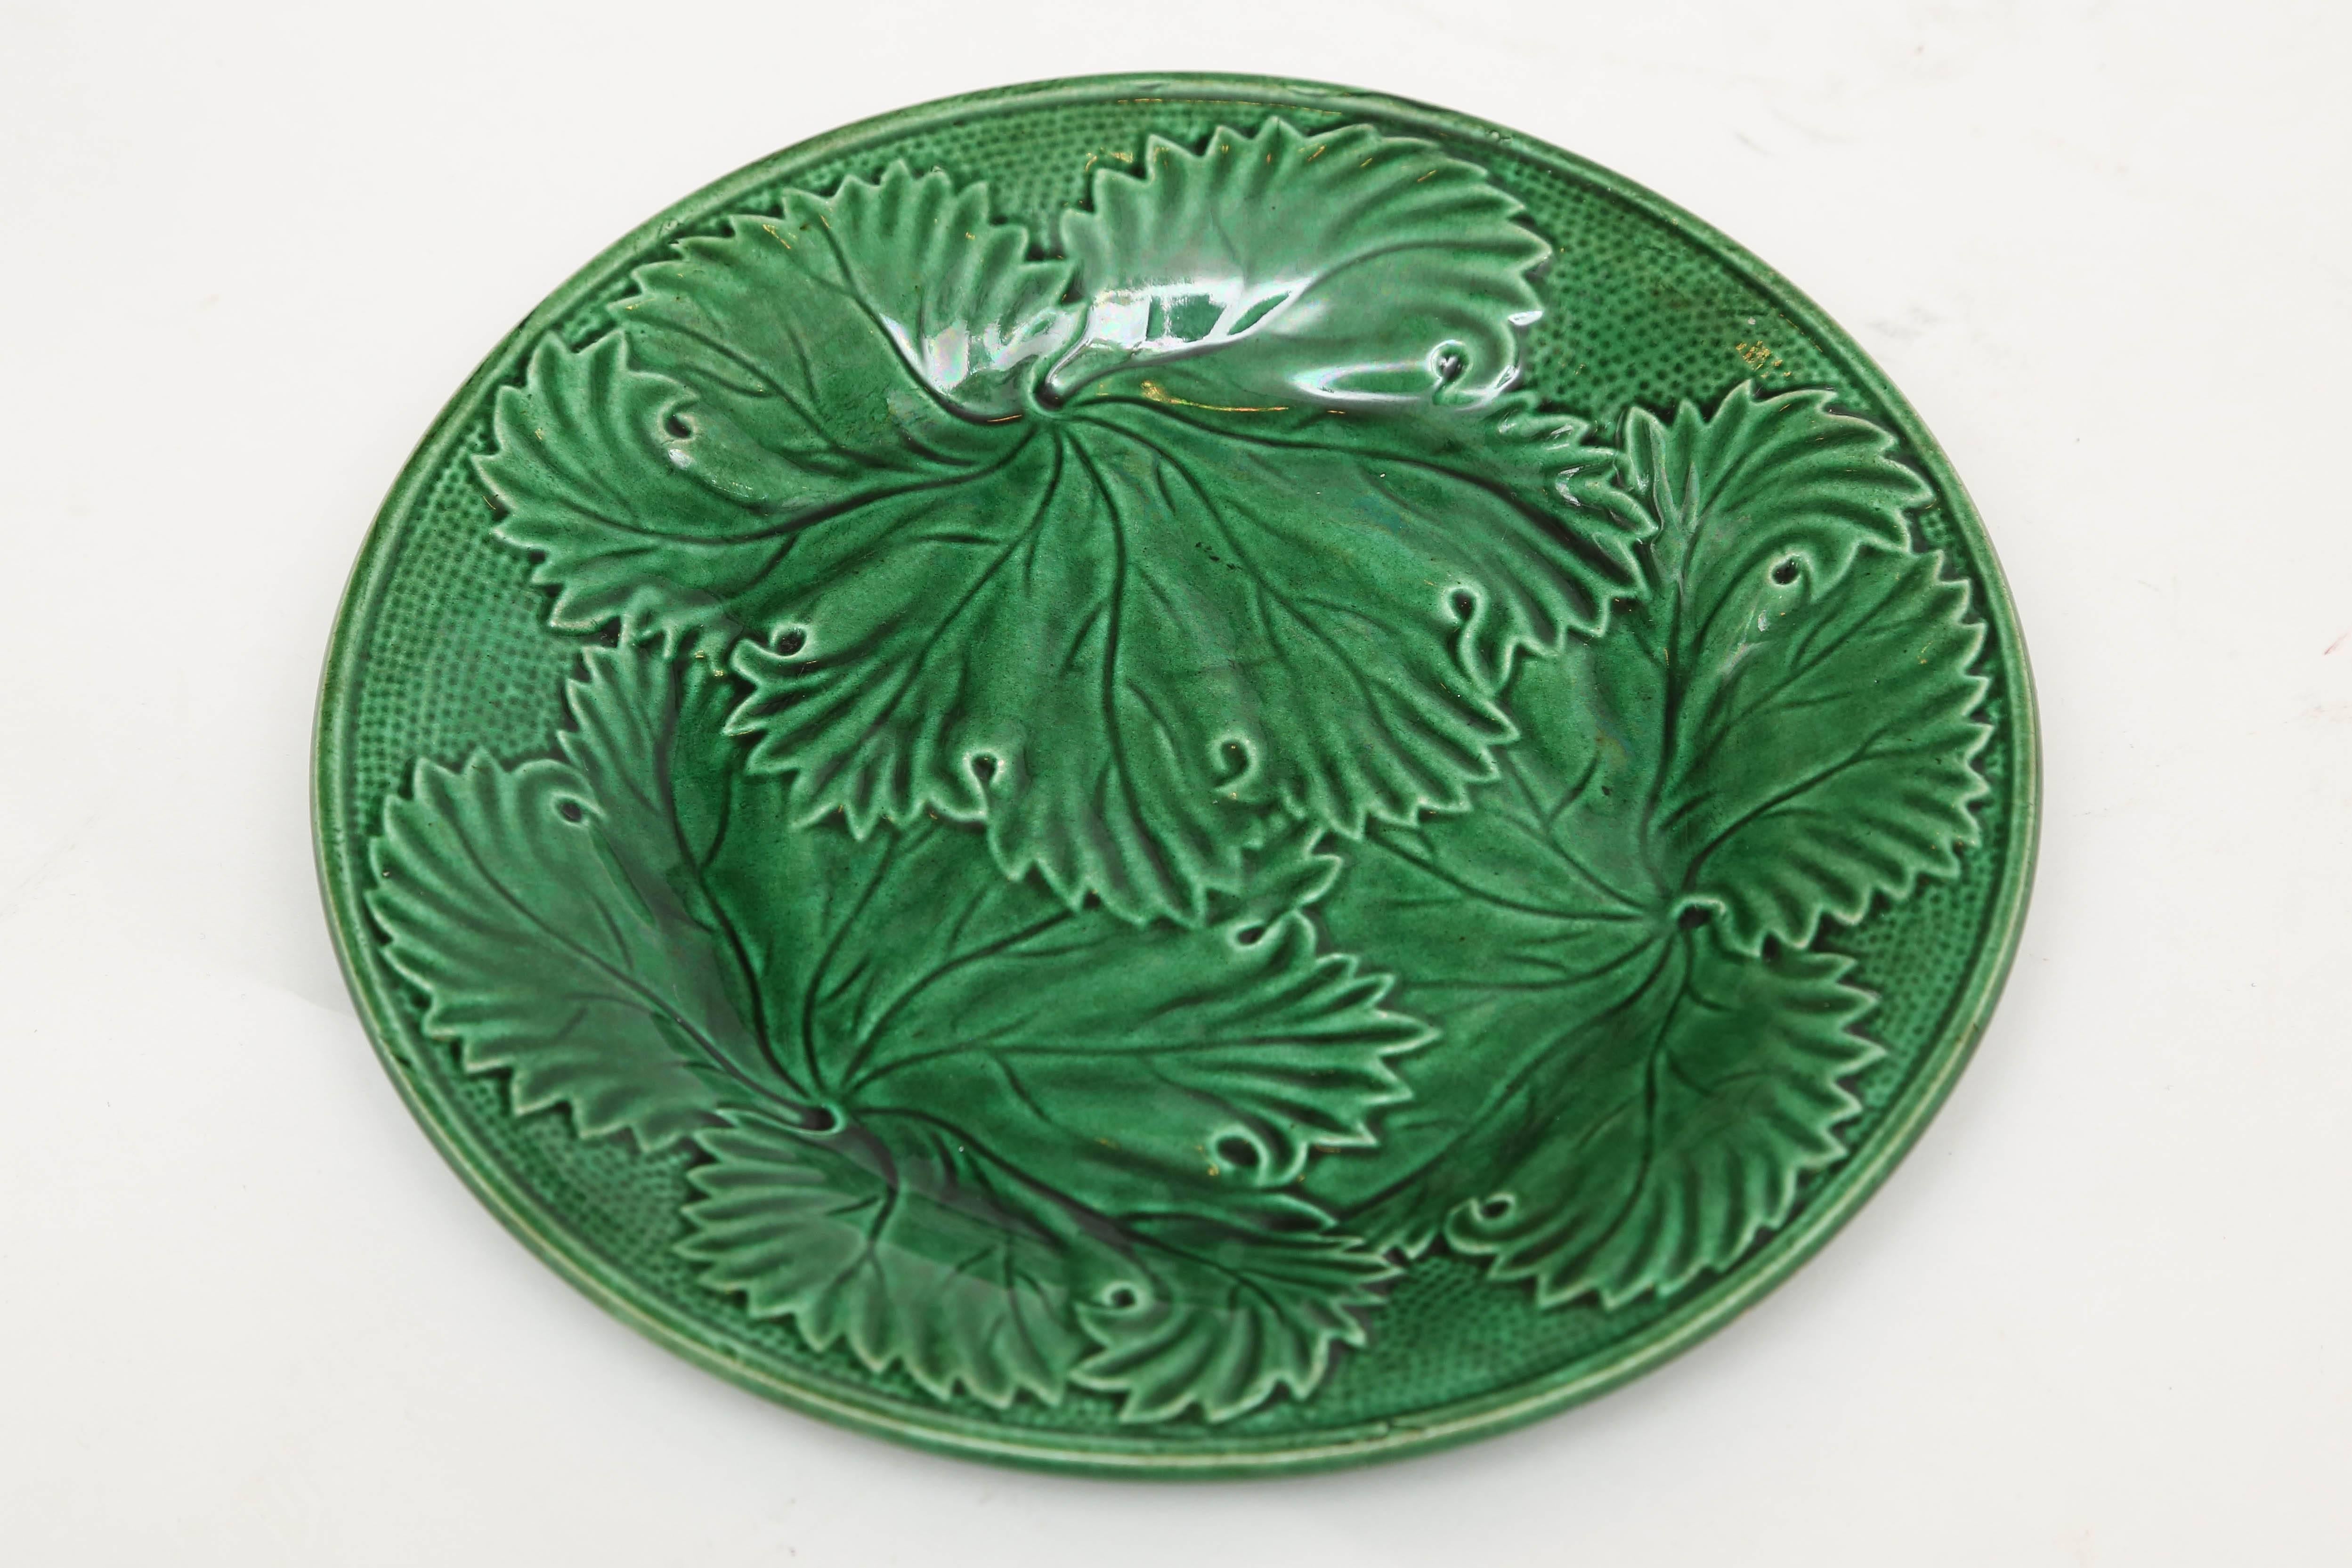 Five piece set  of antique English Majolica consisting of a serving platter and four dishes with an embossed leaf design.
Platter: 8